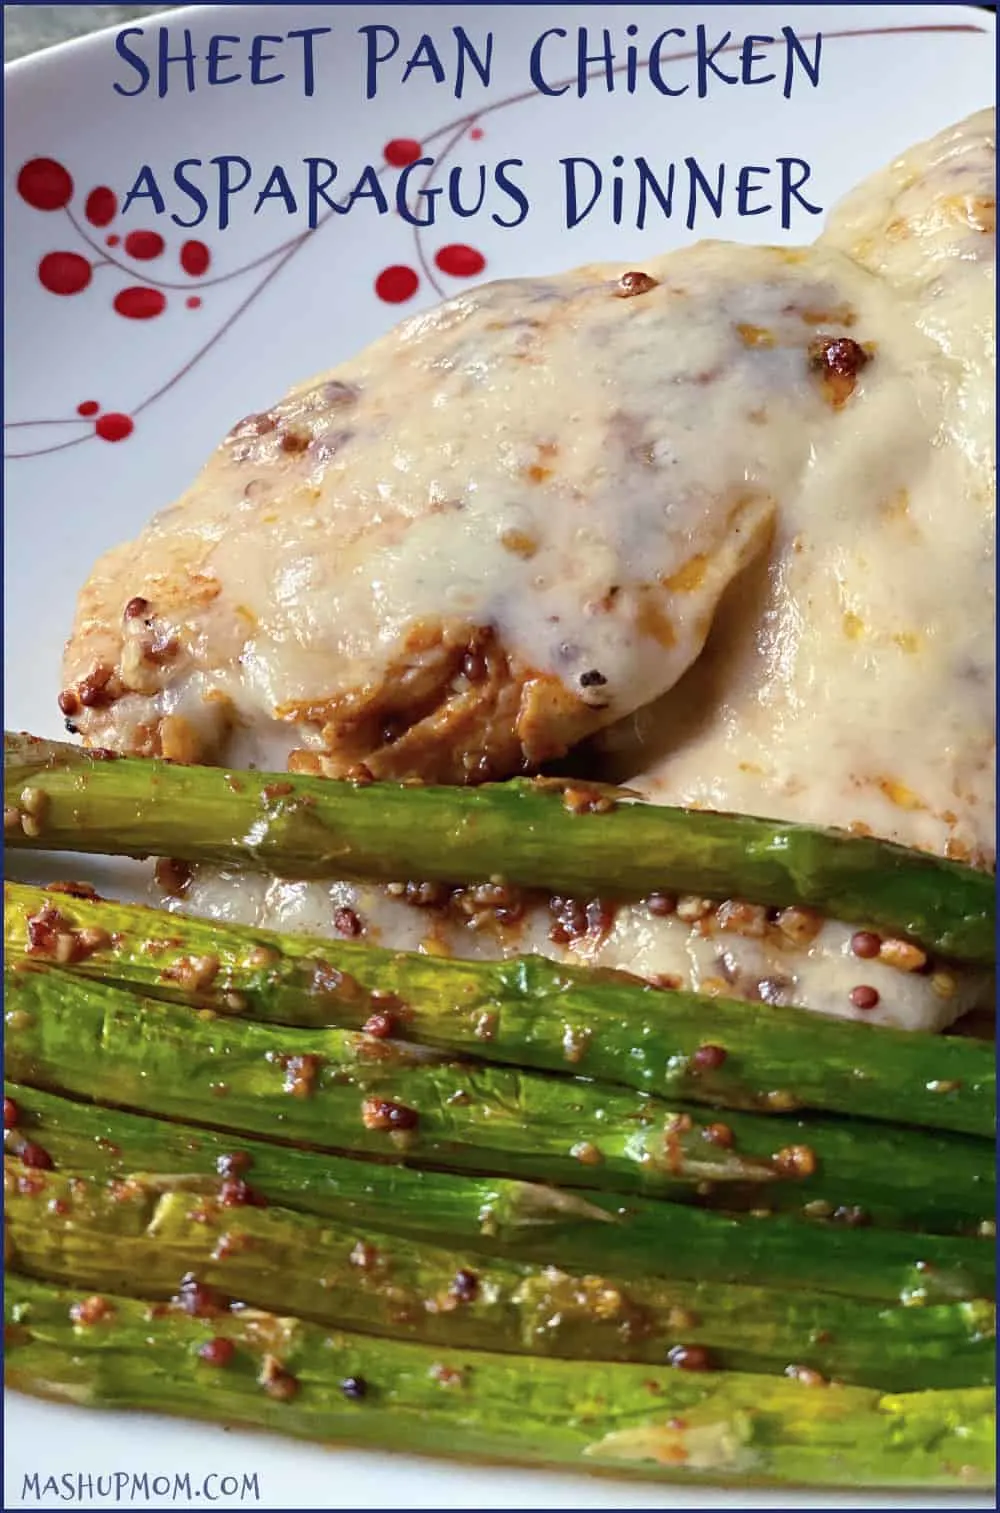 Sheet pan chicken asparagus dinner is an easy, keto friendly one pan weeknight meal.